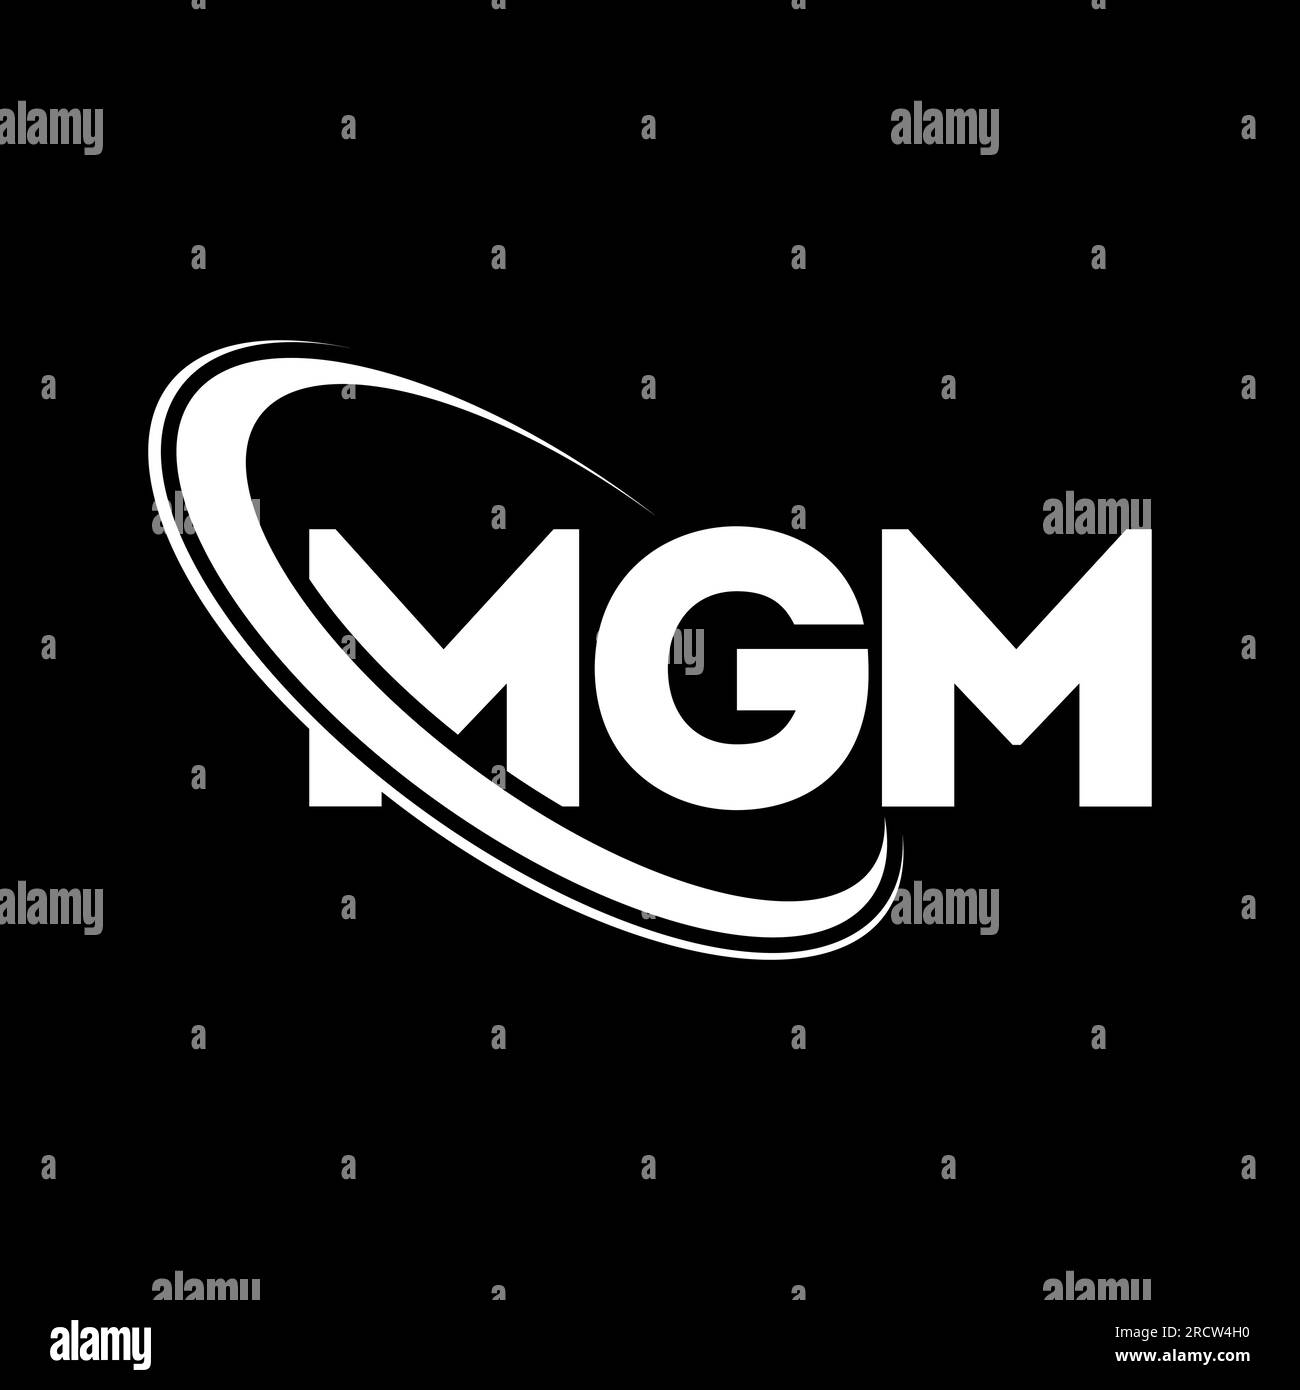 MGM logo. MGM letter. MGM letter logo design. Initials MGM logo linked with circle and uppercase monogram logo. MGM typography for technology, busines Stock Vector